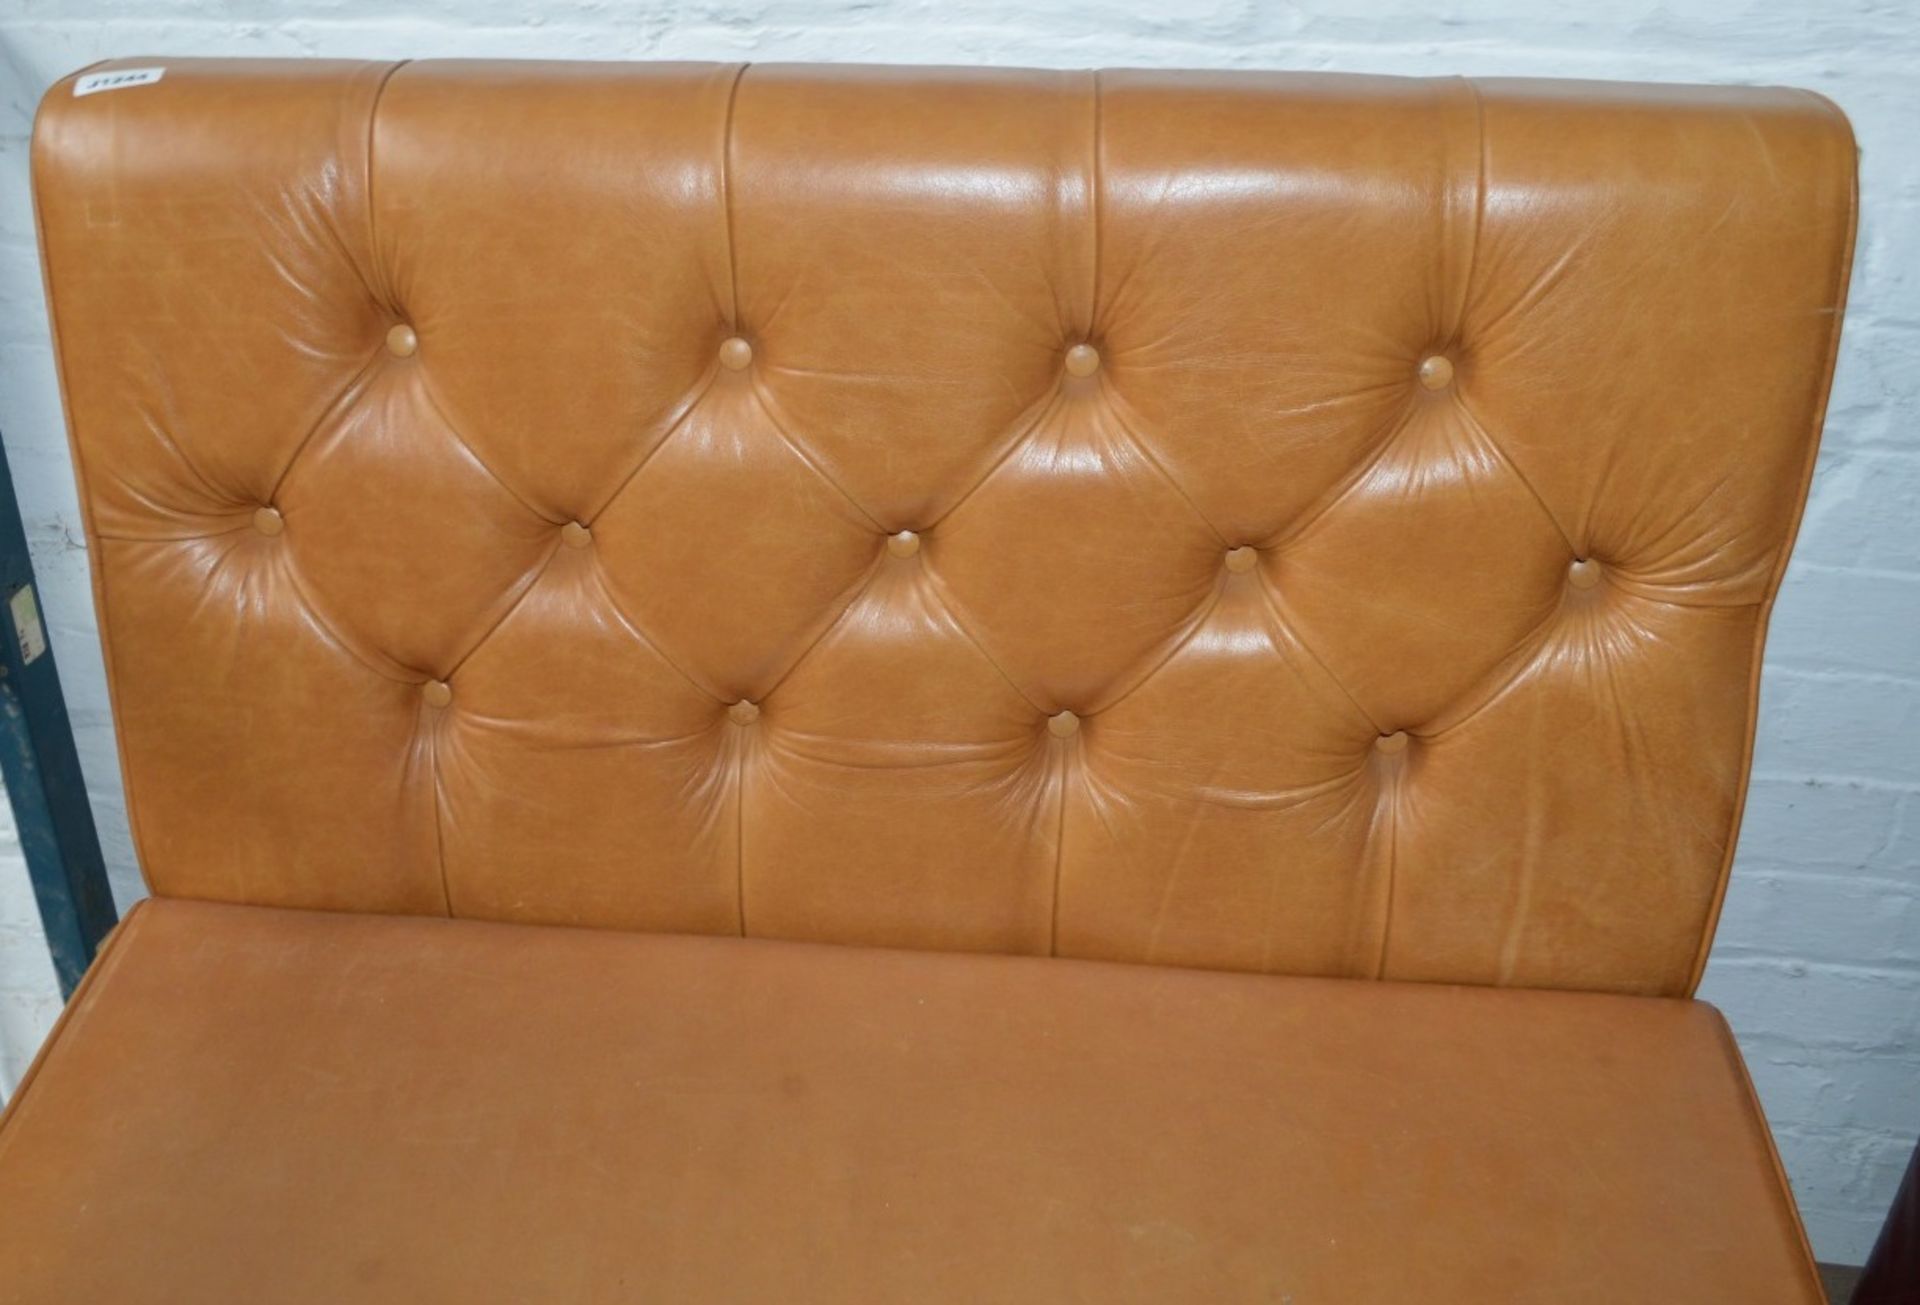 1 x Contemporary Seating Booth Section Upholstered In A Tan Coloured Leather - Image 6 of 9